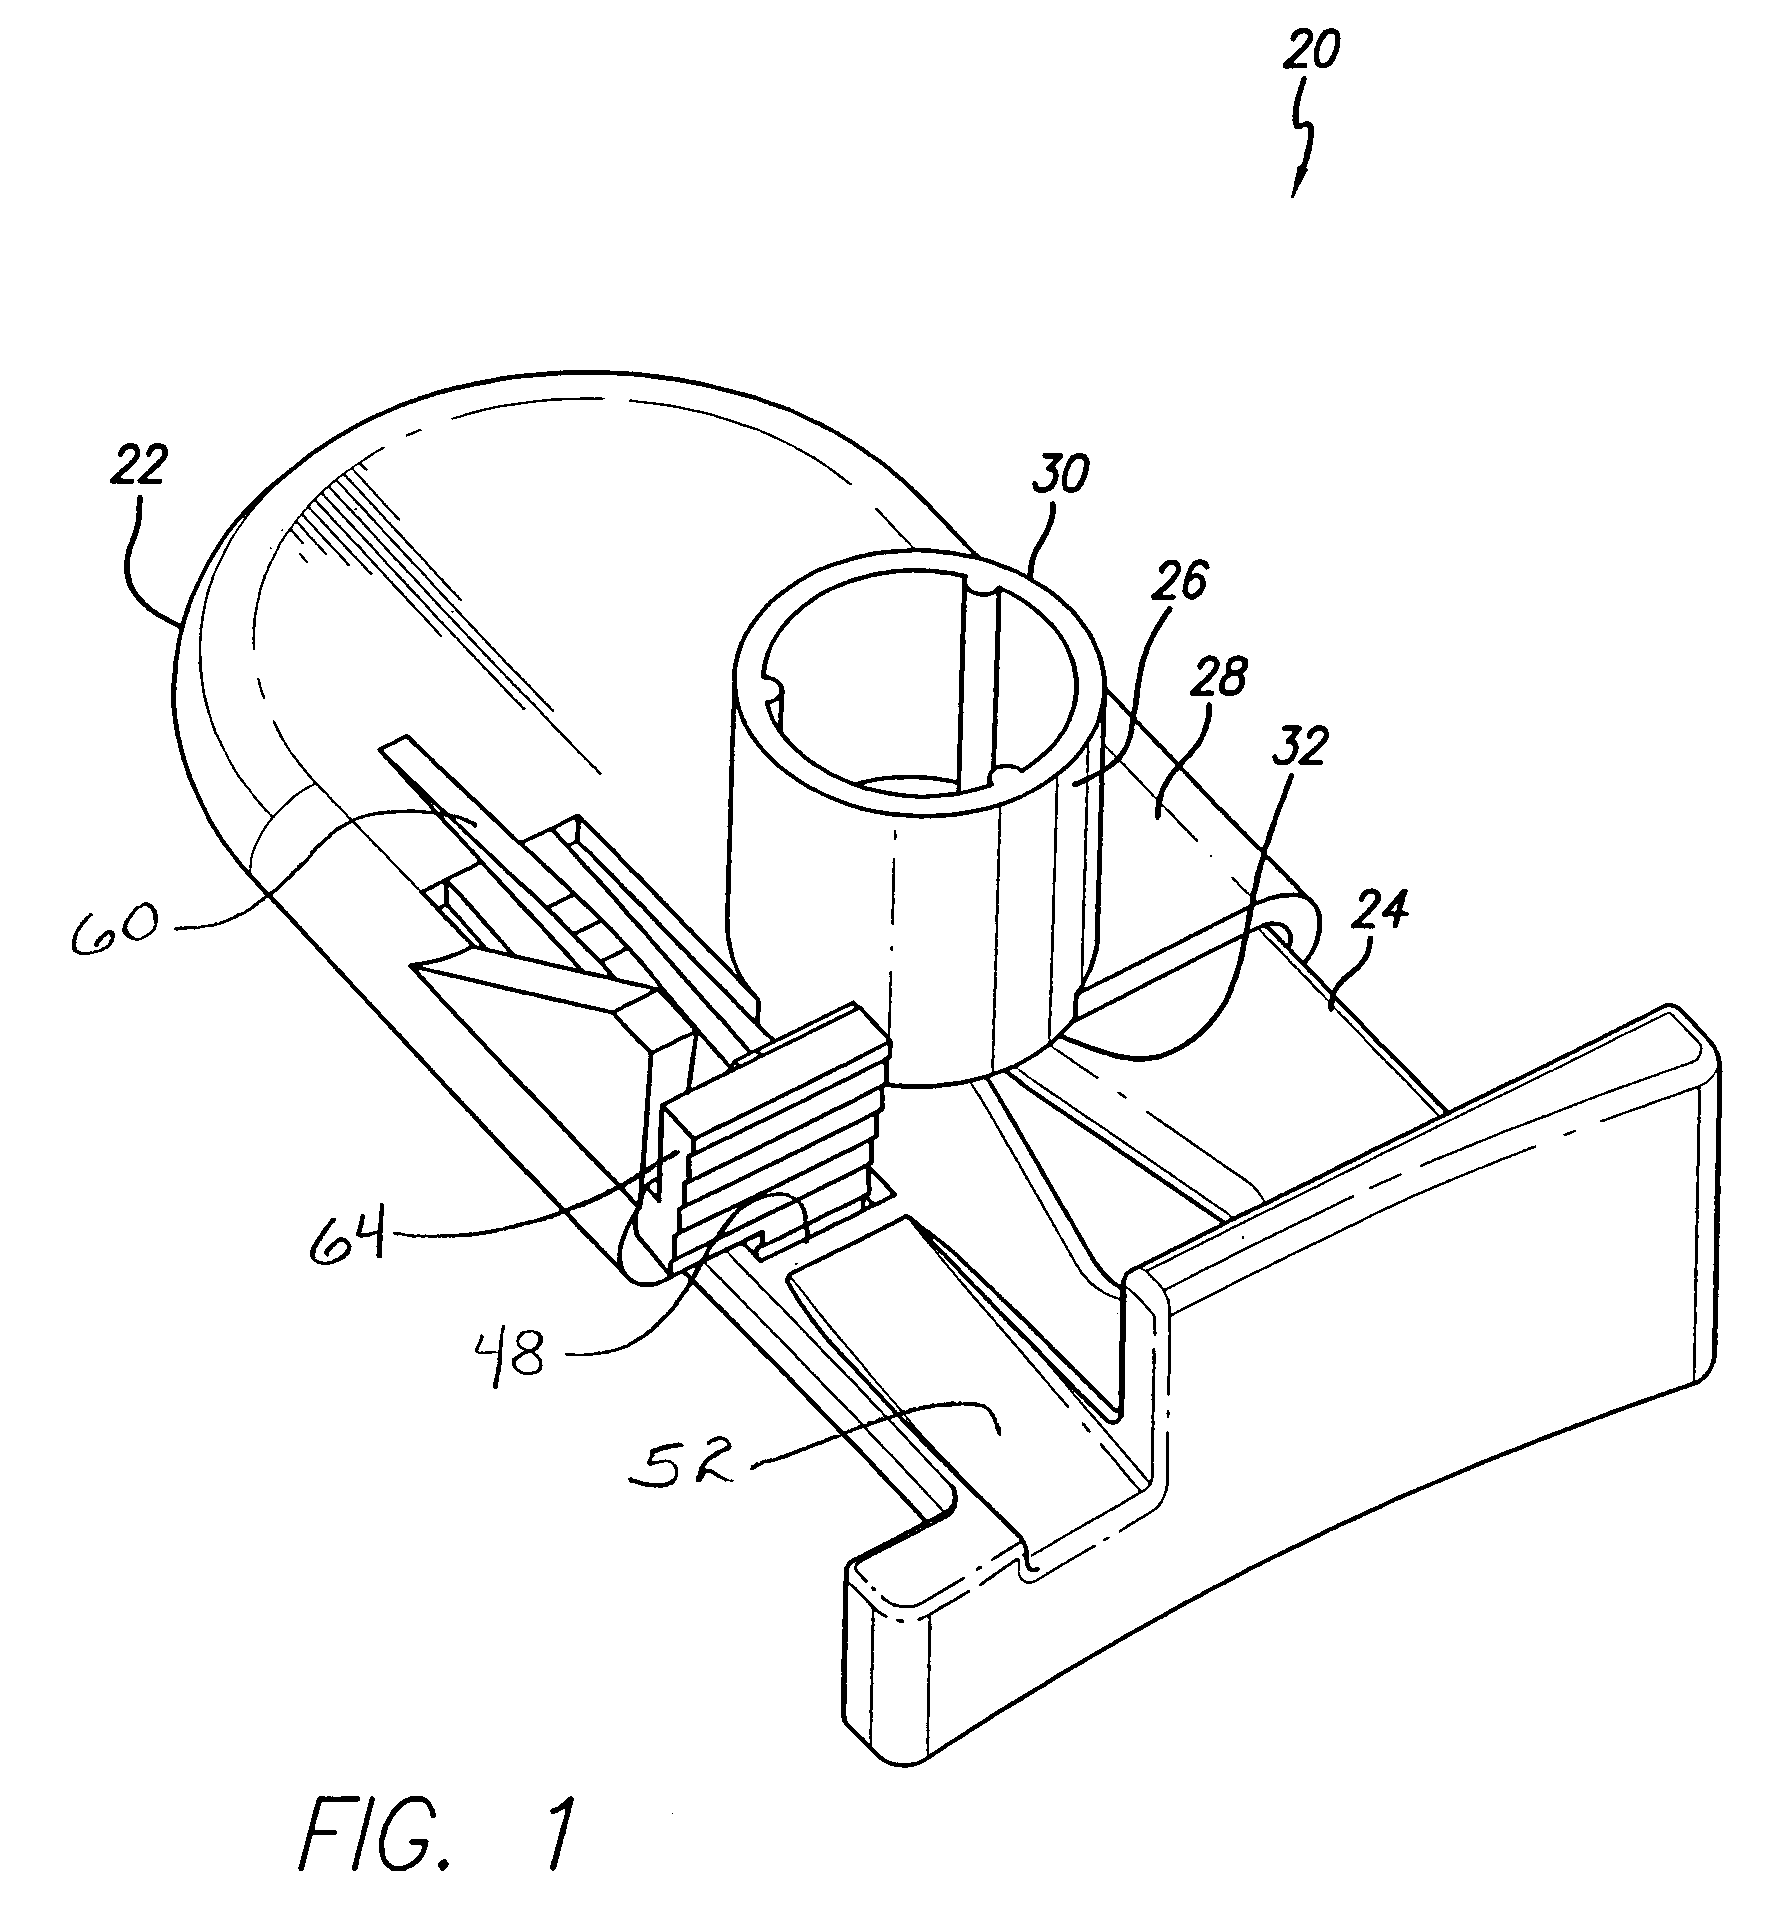 Automatic clamp apparatus having lateral motion resistance for IV infusion sets